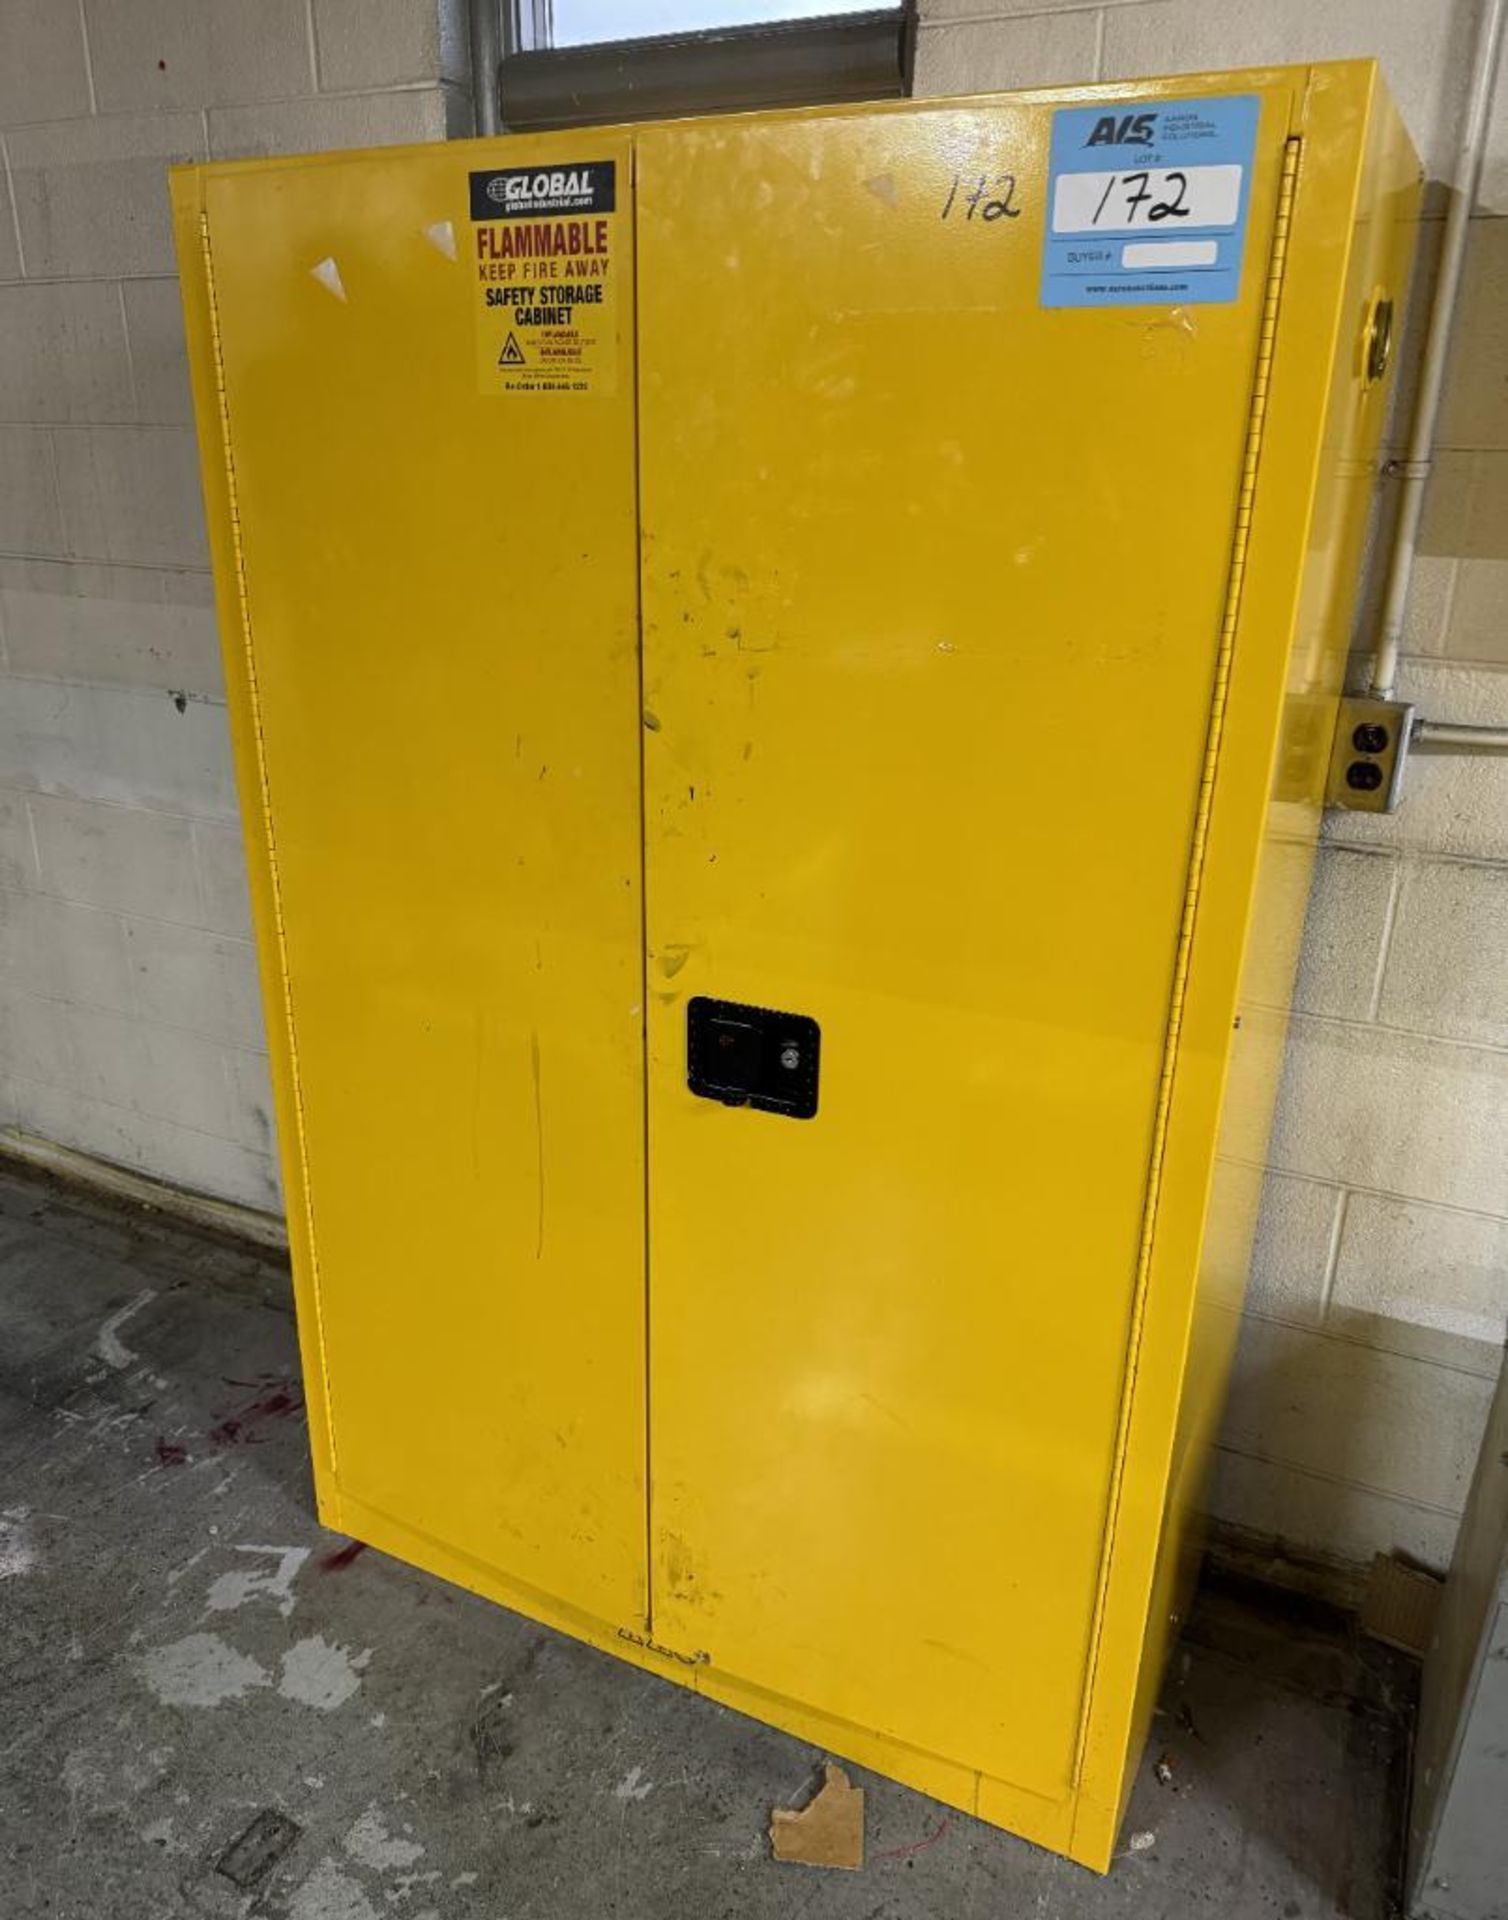 Global Industrial 45 Gallon Capacity Flammable Storage Cabinet, Model 298541.